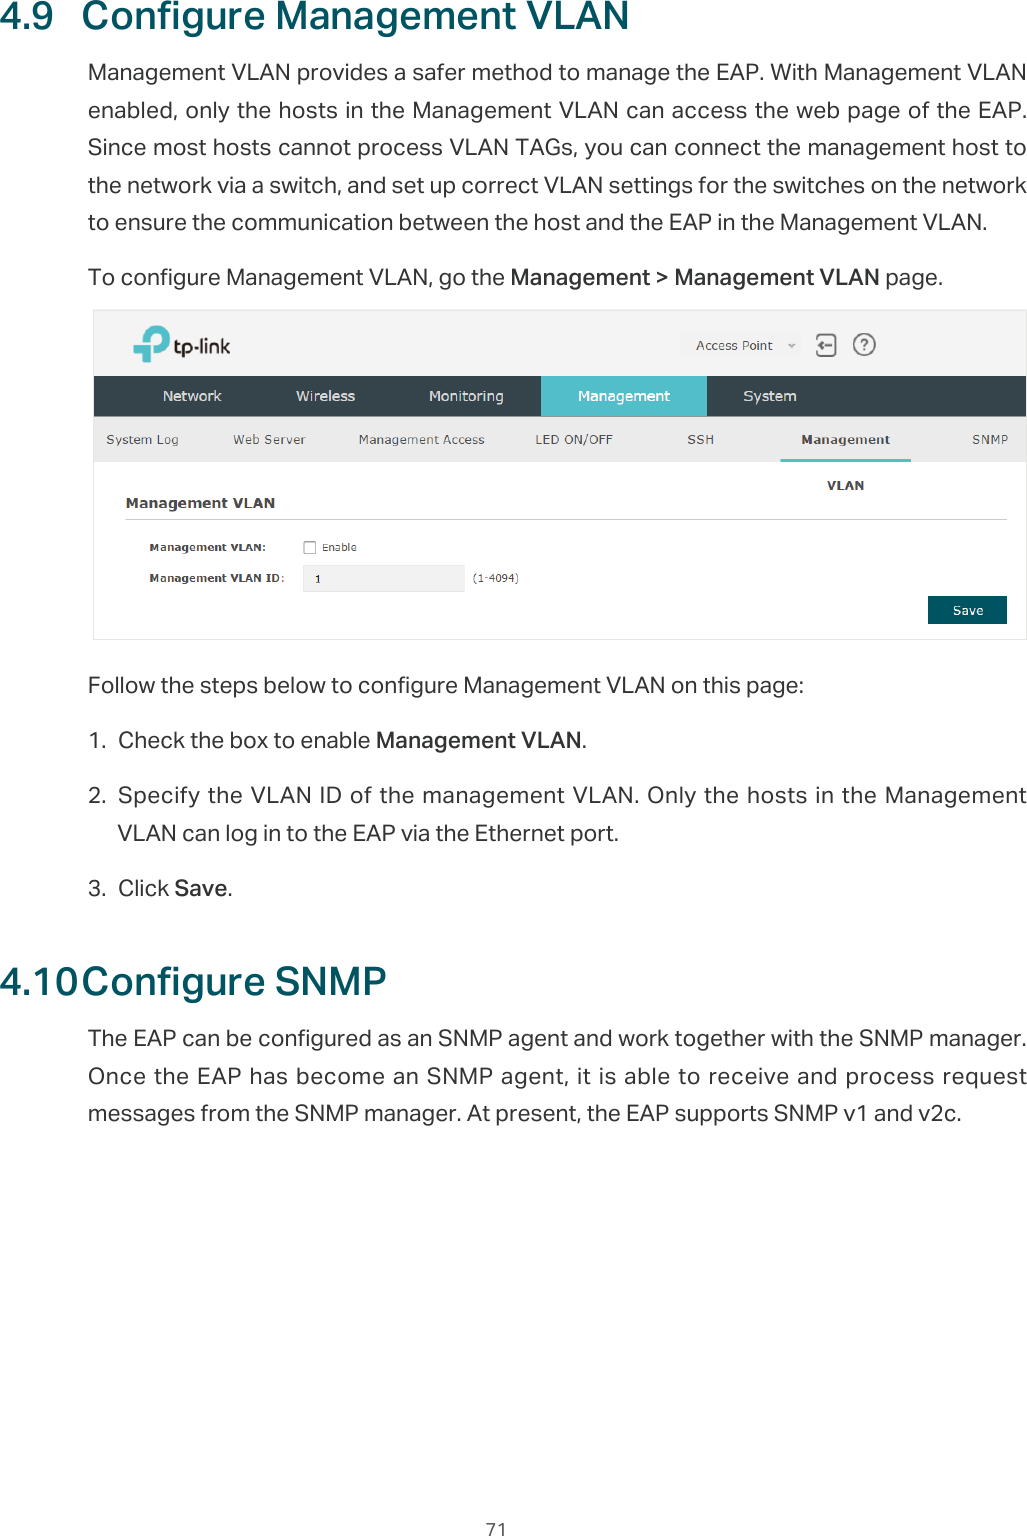  714.9  Configure Management VLANManagement VLAN provides a safer method to manage the EAP. With Management VLAN enabled, only the hosts in the Management VLAN can access the web page of the EAP. Since most hosts cannot process VLAN TAGs, you can connect the management host to the network via a switch, and set up correct VLAN settings for the switches on the network to ensure the communication between the host and the EAP in the Management VLAN.To configure Management VLAN, go the Management &gt; Management VLAN page.Follow the steps below to configure Management VLAN on this page:1. Check the box to enable Management VLAN.2. Specify the VLAN ID of the management VLAN. Only the hosts in the Management VLAN can log in to the EAP via the Ethernet port.3. Click Save.4.10 Configure SNMPThe EAP can be configured as an SNMP agent and work together with the SNMP manager. Once the EAP has become an SNMP agent, it is able to receive and process request messages from the SNMP manager. At present, the EAP supports SNMP v1 and v2c.